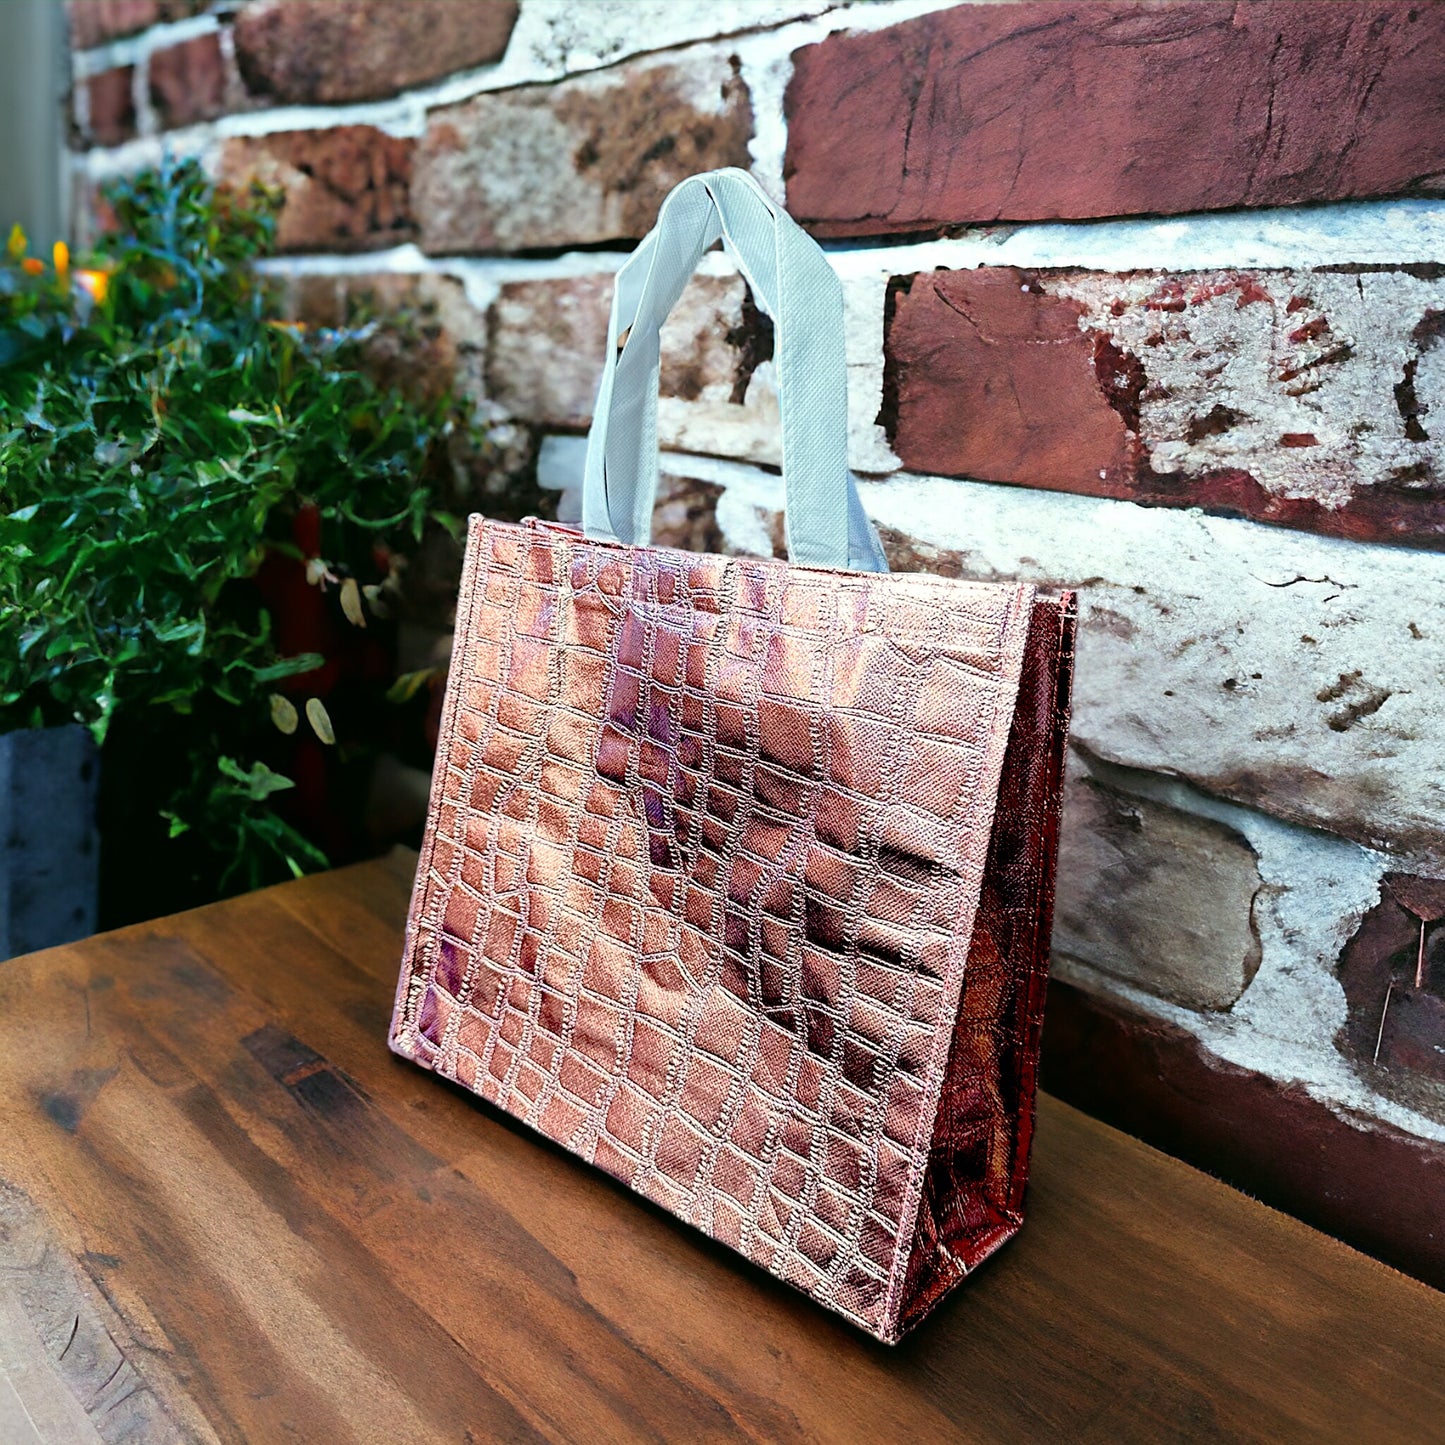 Reusable Rose Gold Shopping Bag (free with purchase of $14 or more)